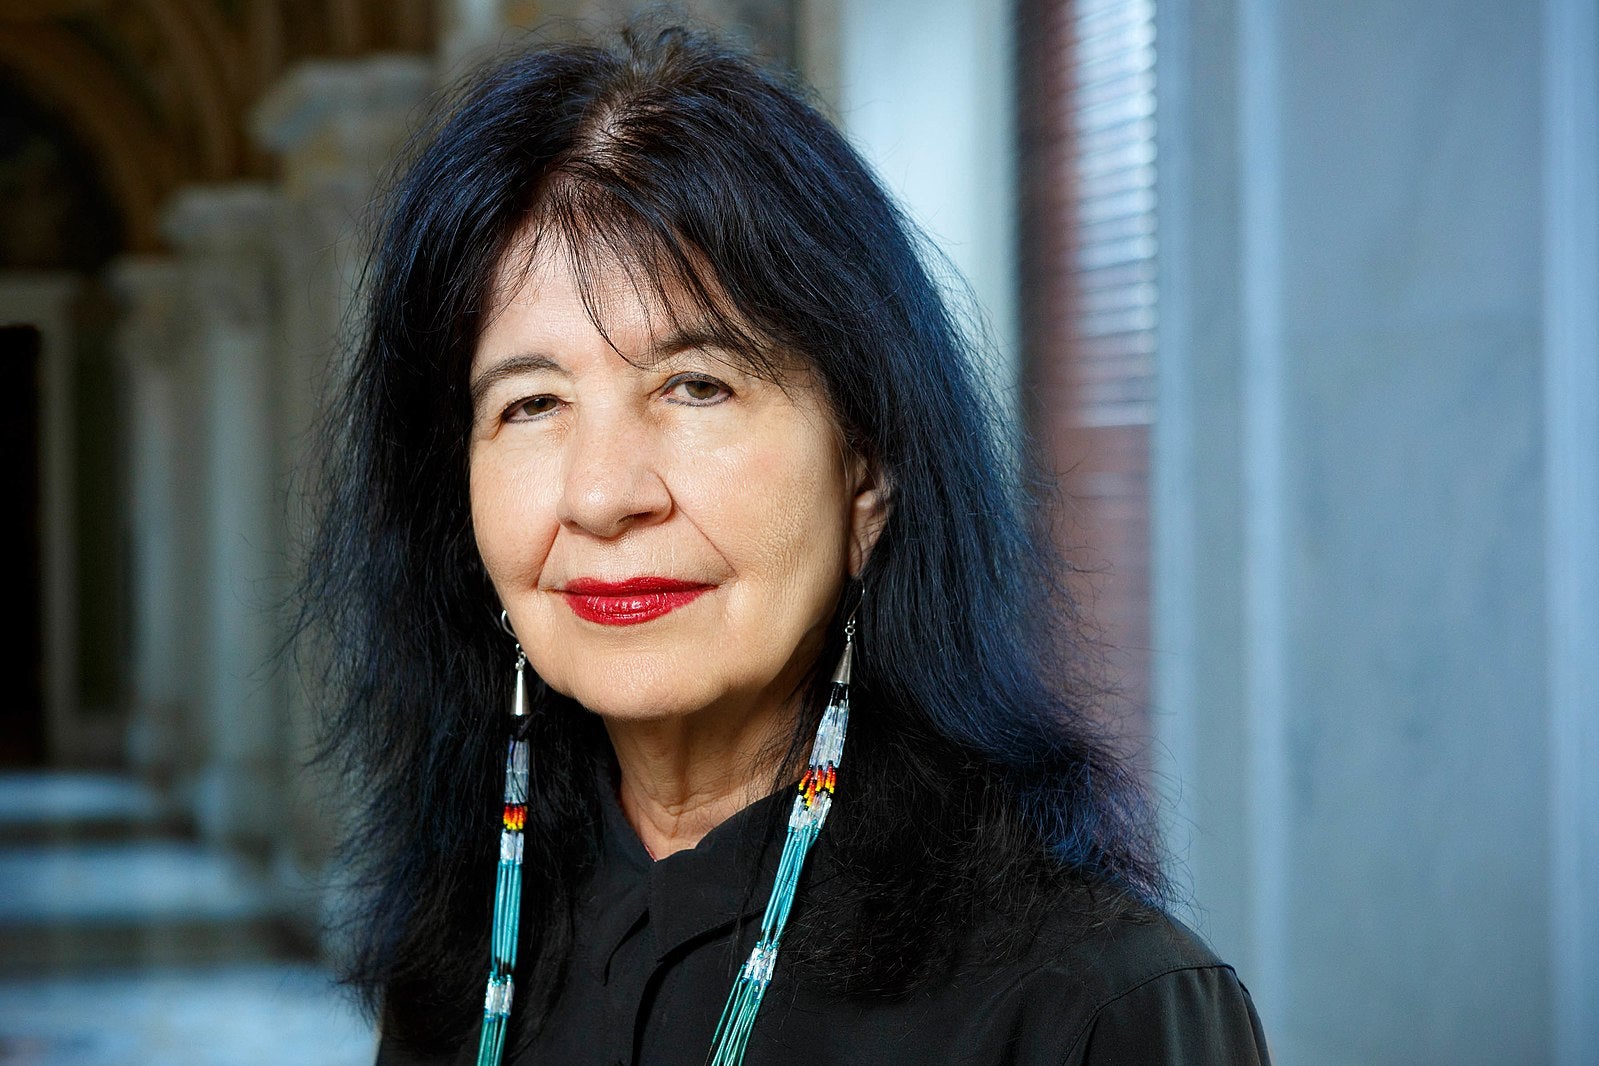 Poet Laureate of the United States Joy Harjo, June 6, 2019. Harjo is the first Native American to serve as poet laureate and is a member of the Muscogee Creek Nation. Photo by Shawn Miller/Library of Congress...Note: Privacy and publicity rights for individuals depicted may apply.